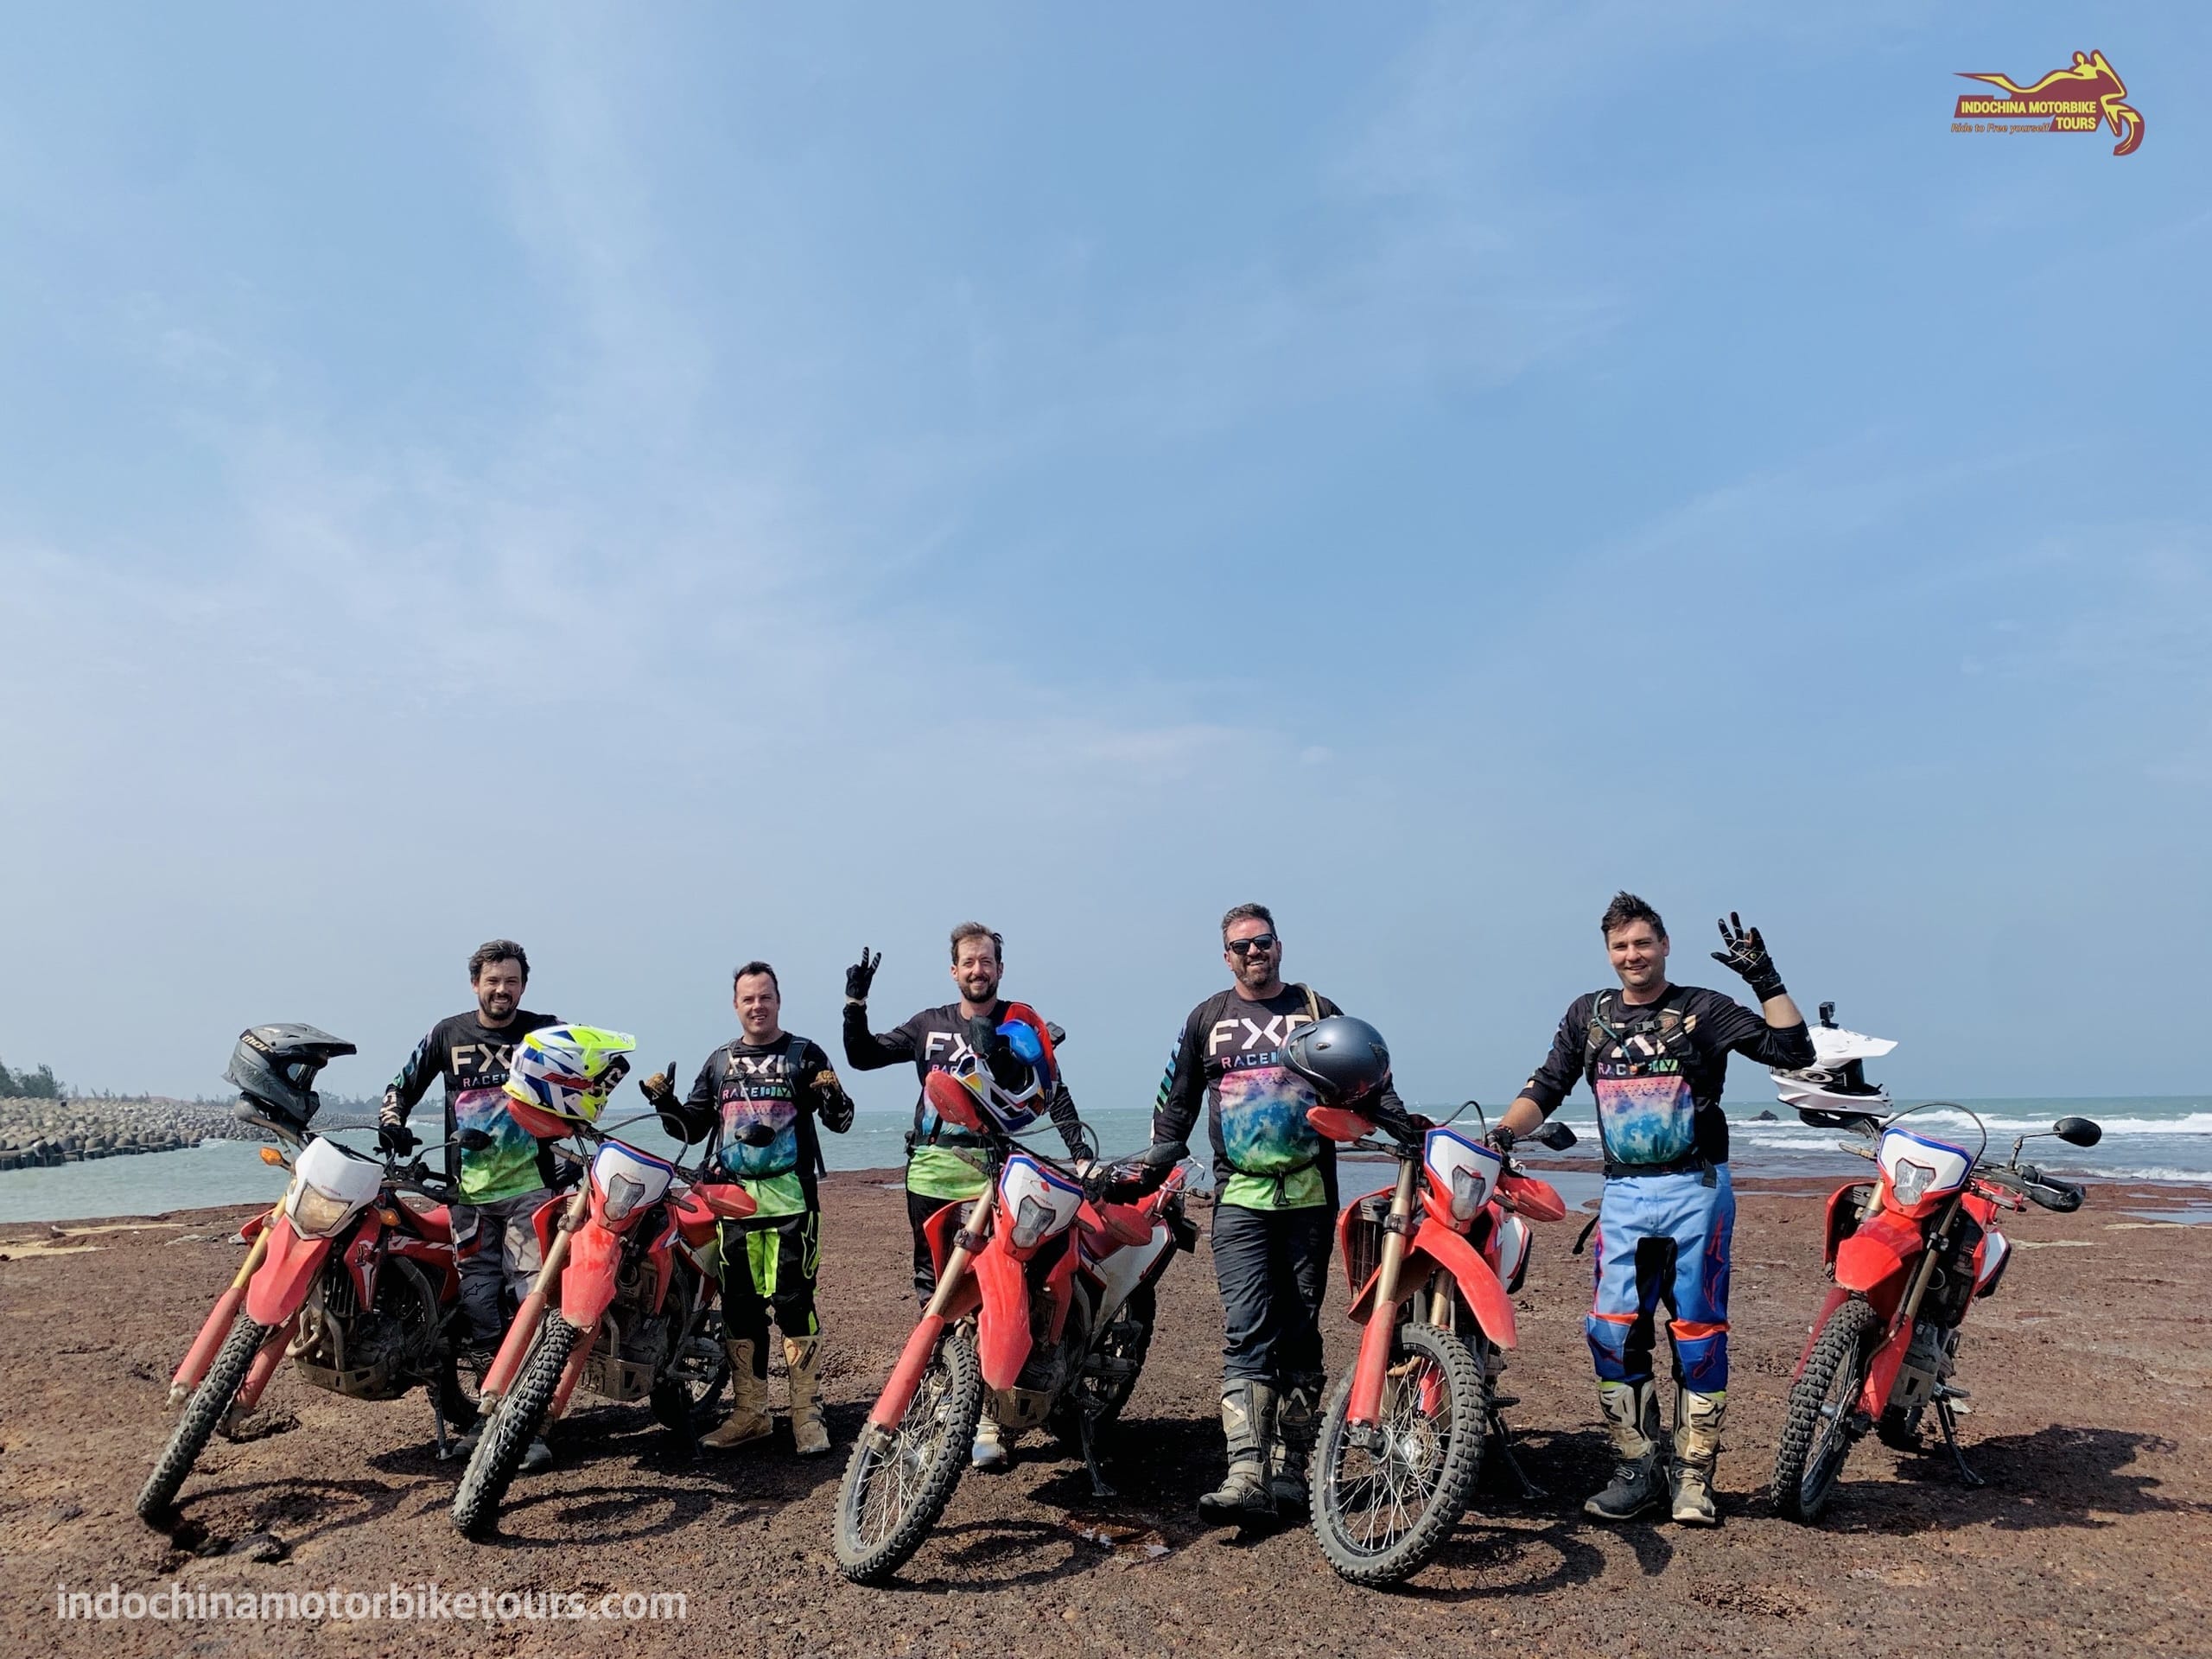 Venturing Saigon Motorcycle Tour to Central Highlands and HOI AN Via Ho Chi Minh Trails and Coastline